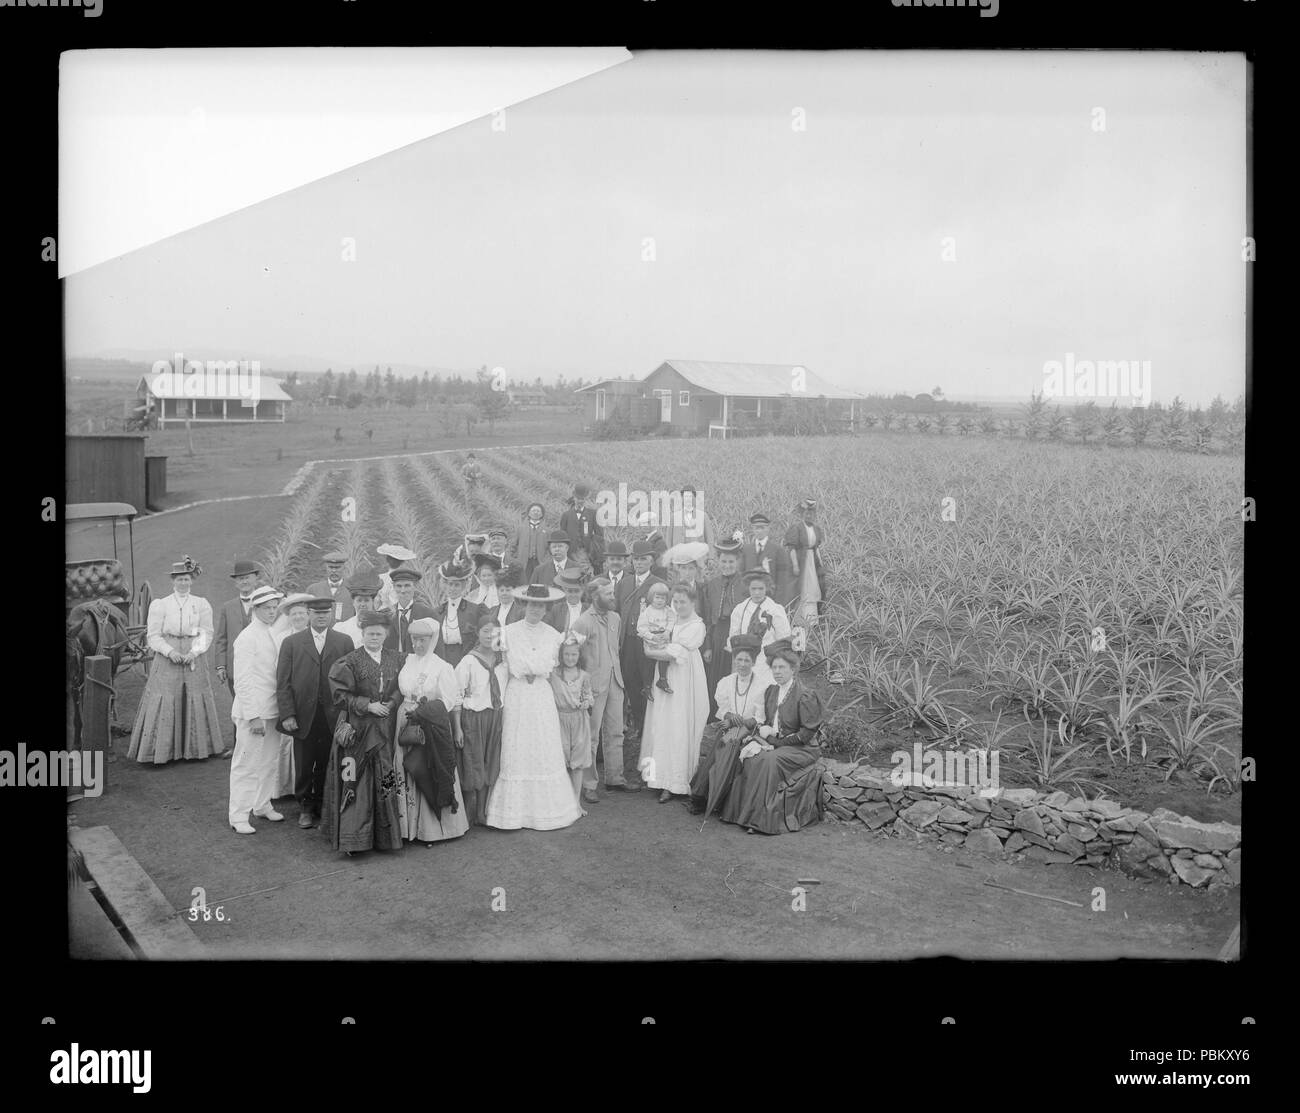 . English: Los Angeles Chamber of Commerce group of people in pineapple grove, Hawaii, 1907 Photograph of the Los Angeles Chamber of Commerce group of people standing beside a pineapple grove, Hawaii, 1907. The men wear suits while the women wear long dresses and hats. A few children can be seen in the group. The cultivated field is behind and to the group's right. A carriage and several buildings are also visible. Photoprint reads, 'Wiggins'.  Call number: CHS-386 Filename: CHS-386 Coverage date: 1907 Part of collection: California Historical Society Collection, 1860-1960 Format: glass plate  Stock Photo